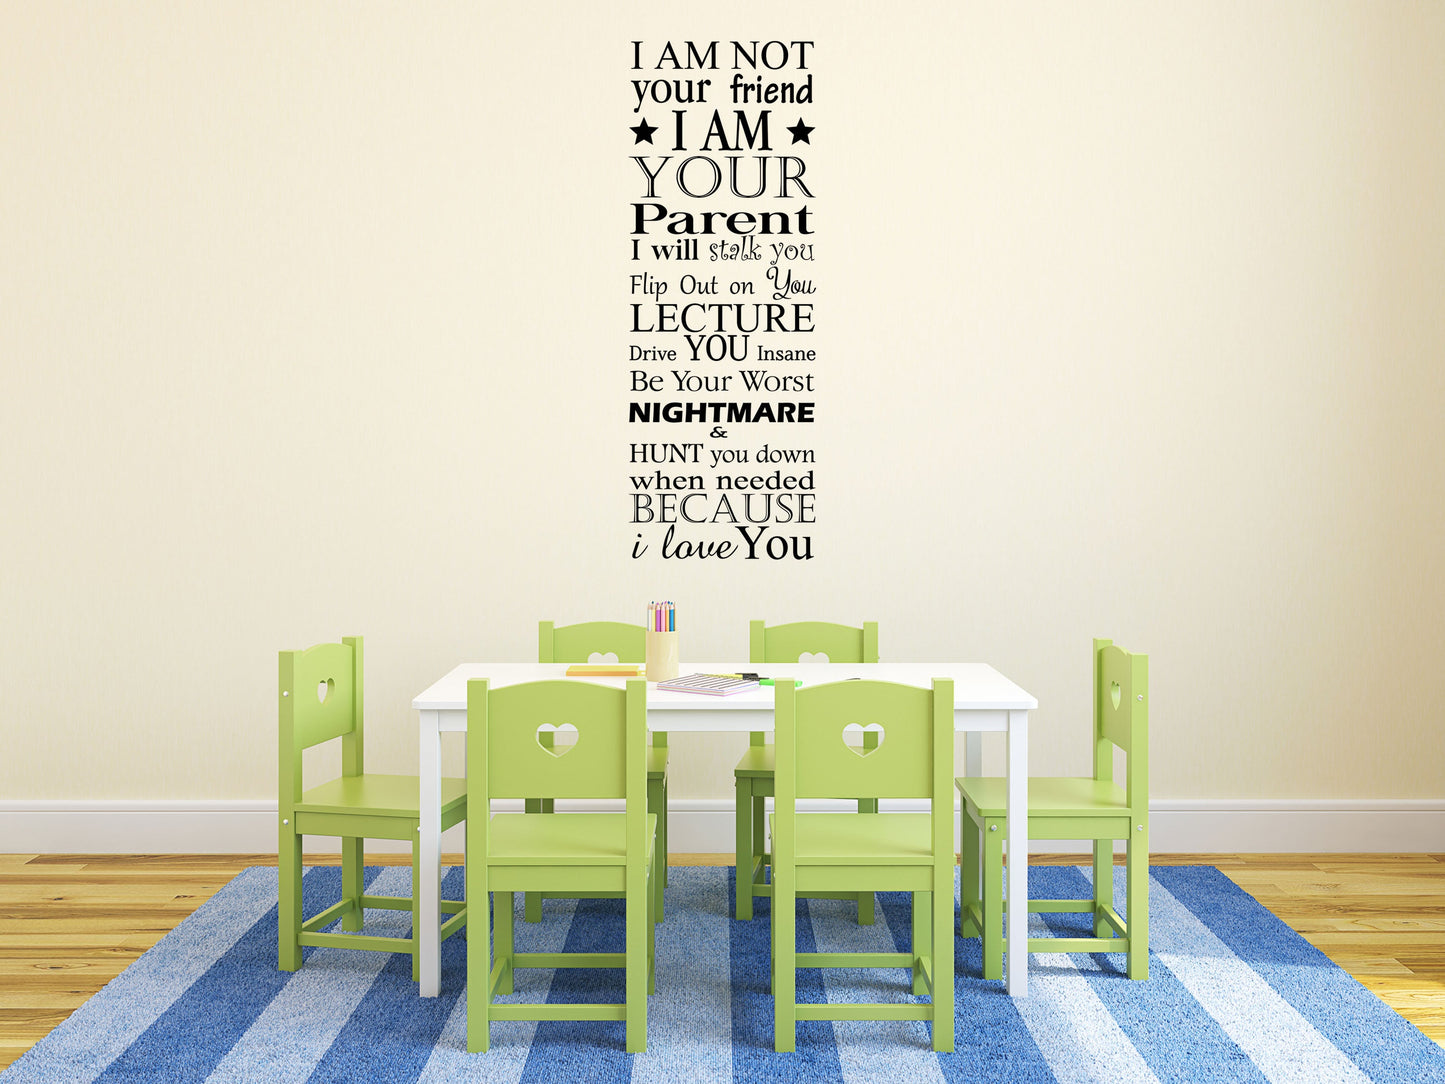 I Am Your Parent Wall Decal Cute Sayings Wall Sticker Love You Lettering Decal Signs Parent Wall Decal Vinyl Wall Decal Inspirational Wall Signs 